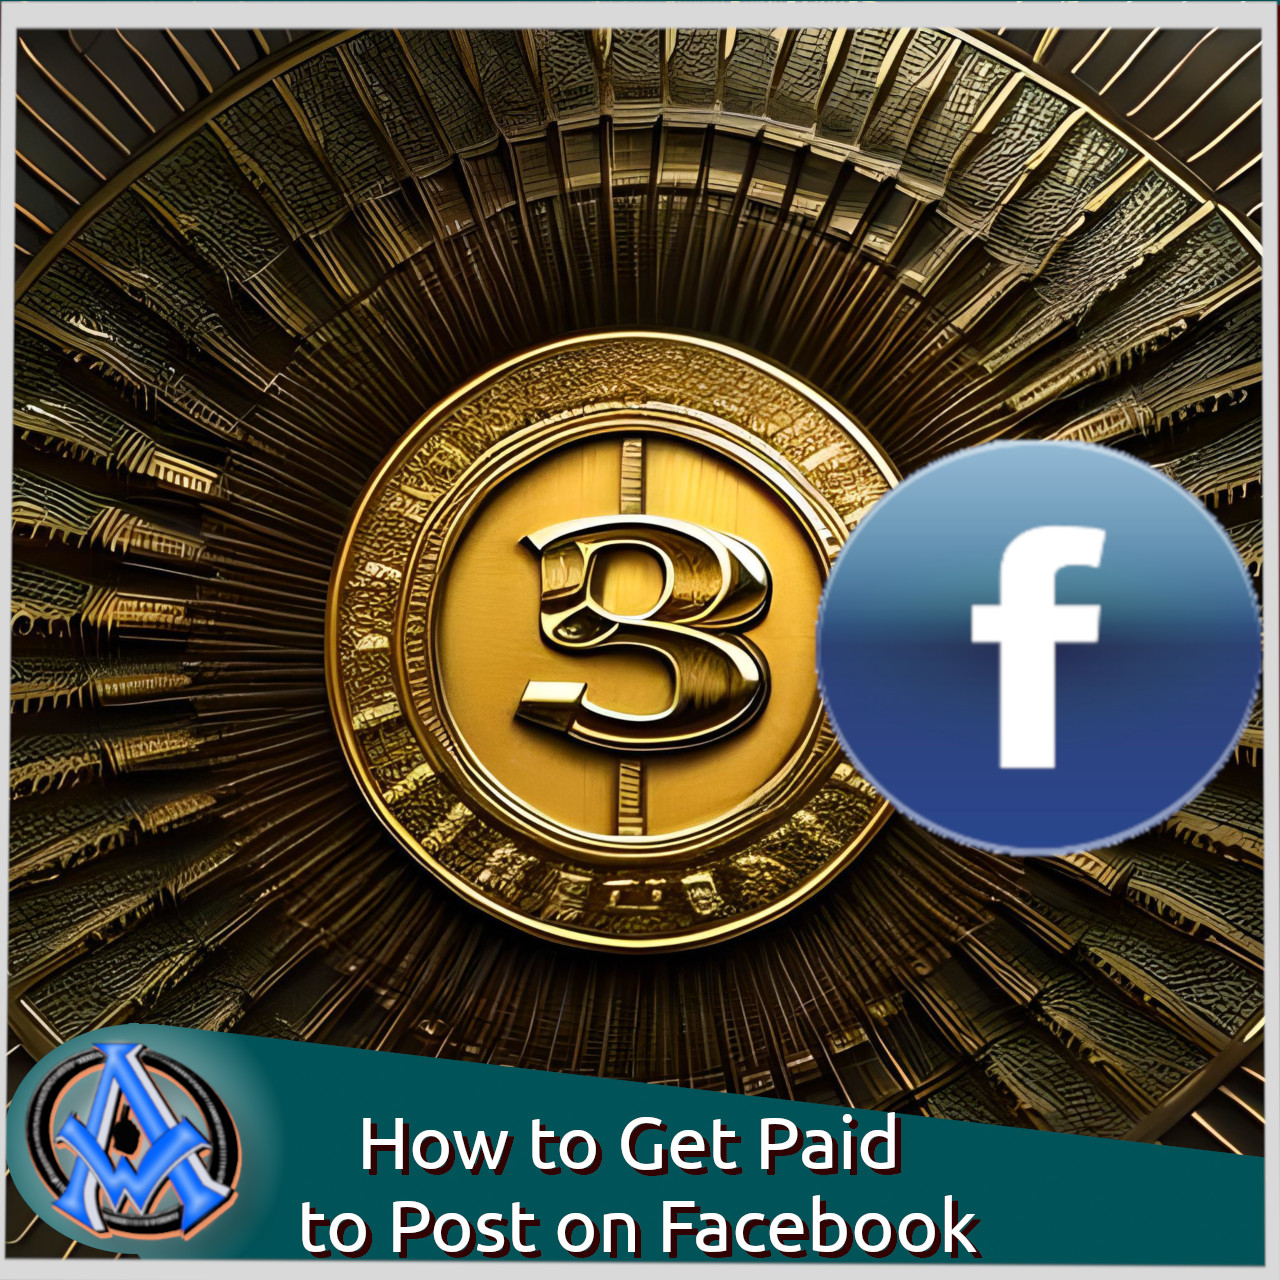 Maximizing Your Income: A Comprehensive Guide on How to Get Paid to Post on Facebook